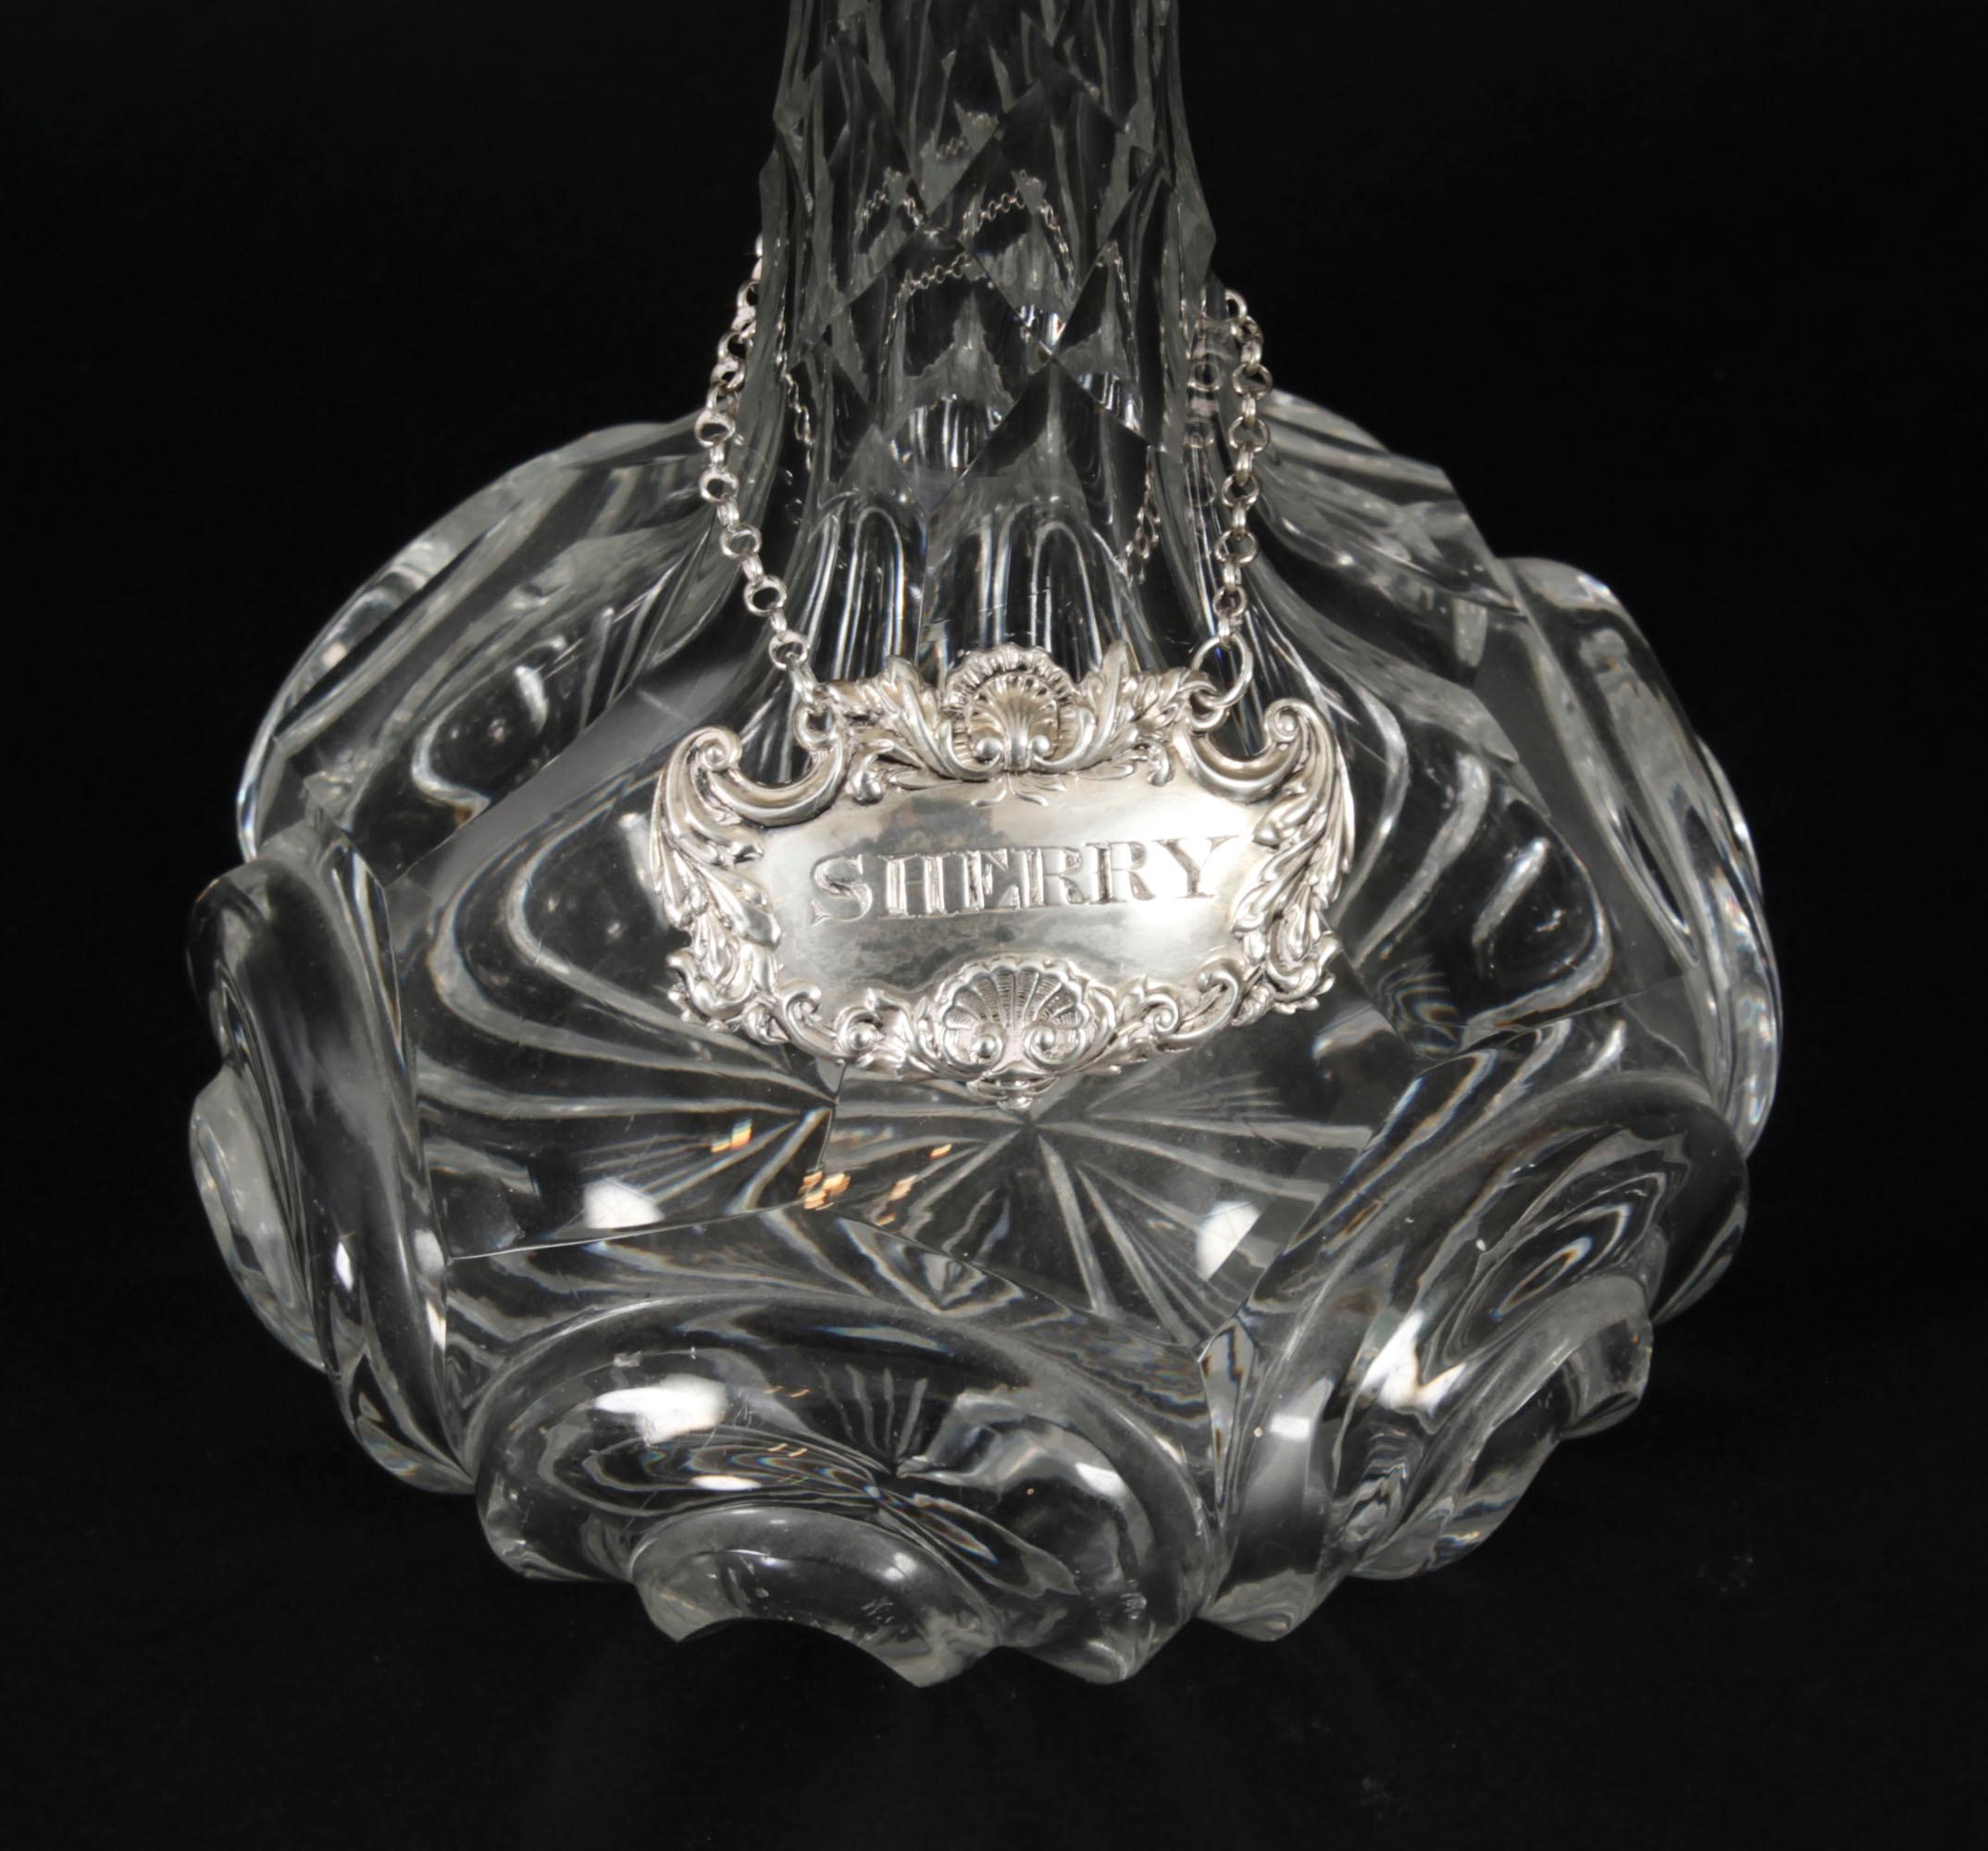 Antique Cut Glass Ship's Sherry Decanter with Silver Label Circa 1920 In Good Condition For Sale In London, GB